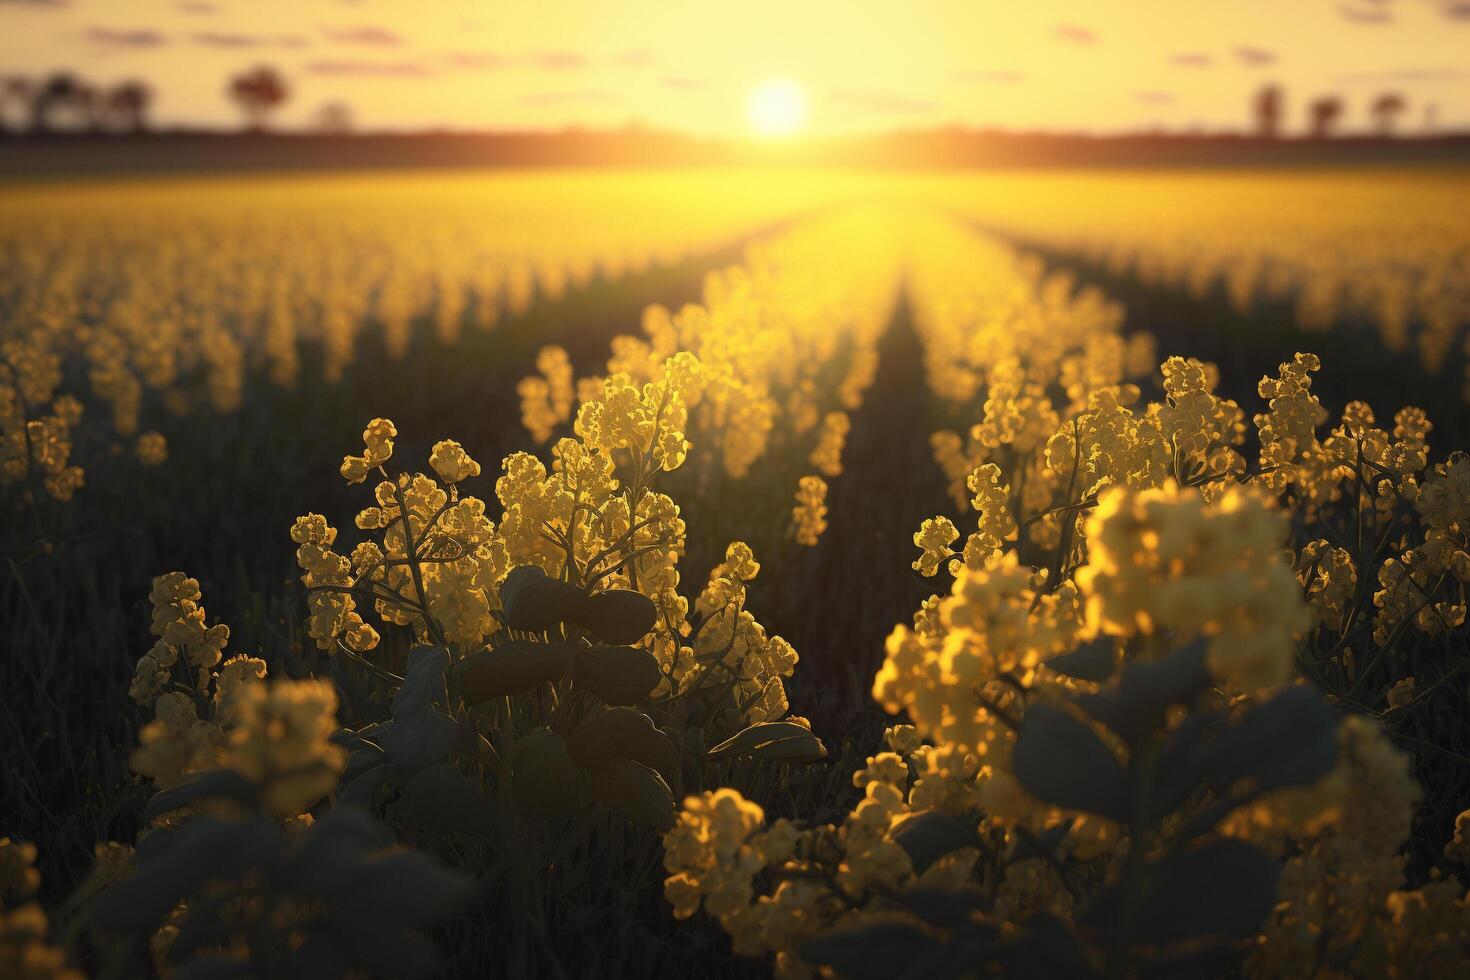 A field of yellow flowers with the sun setting in the background, photo